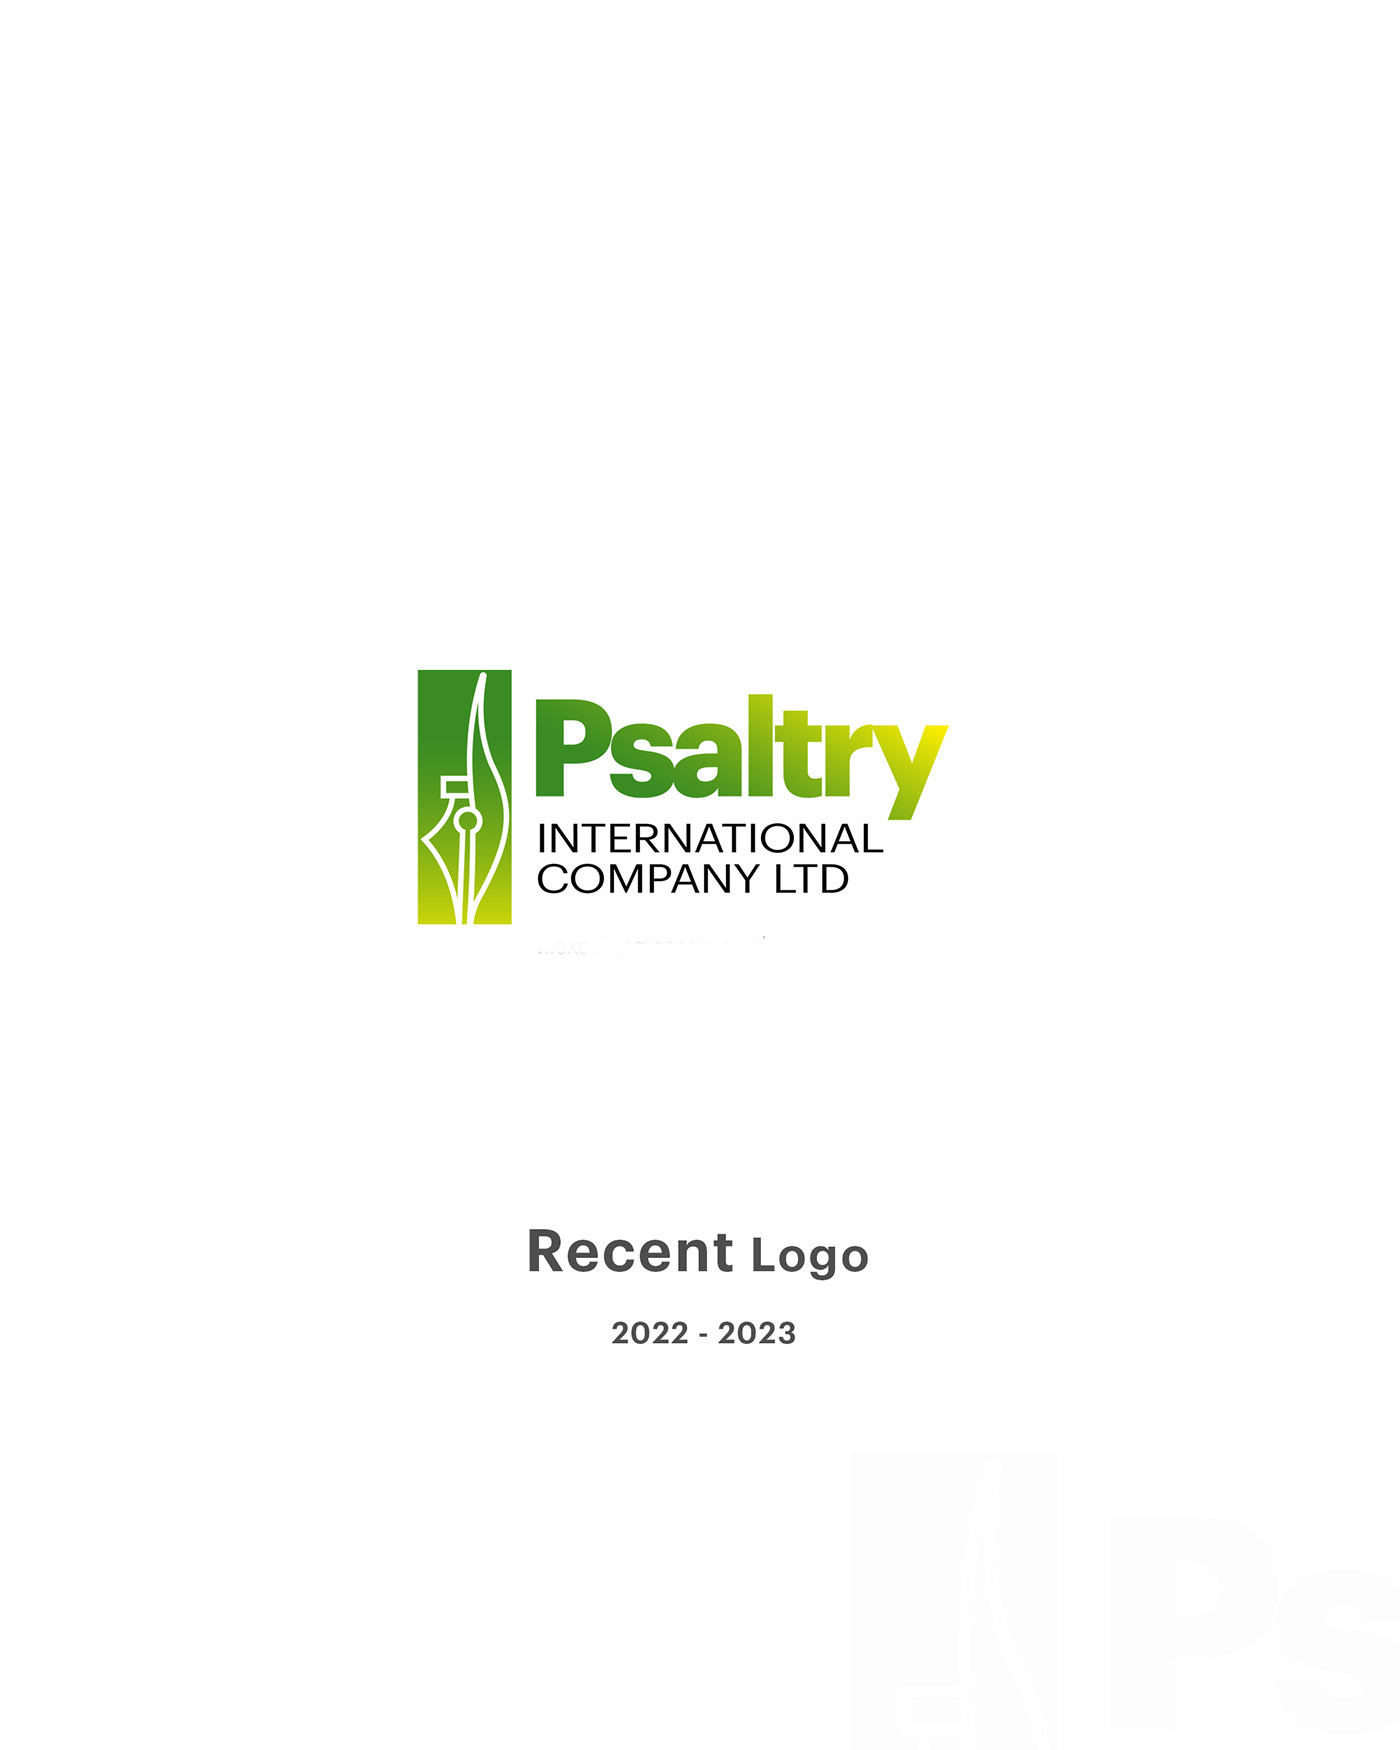 Logo redesign rebranding adobe illustrator adobe agriculture Consulting industrialism microsoft surface book 3